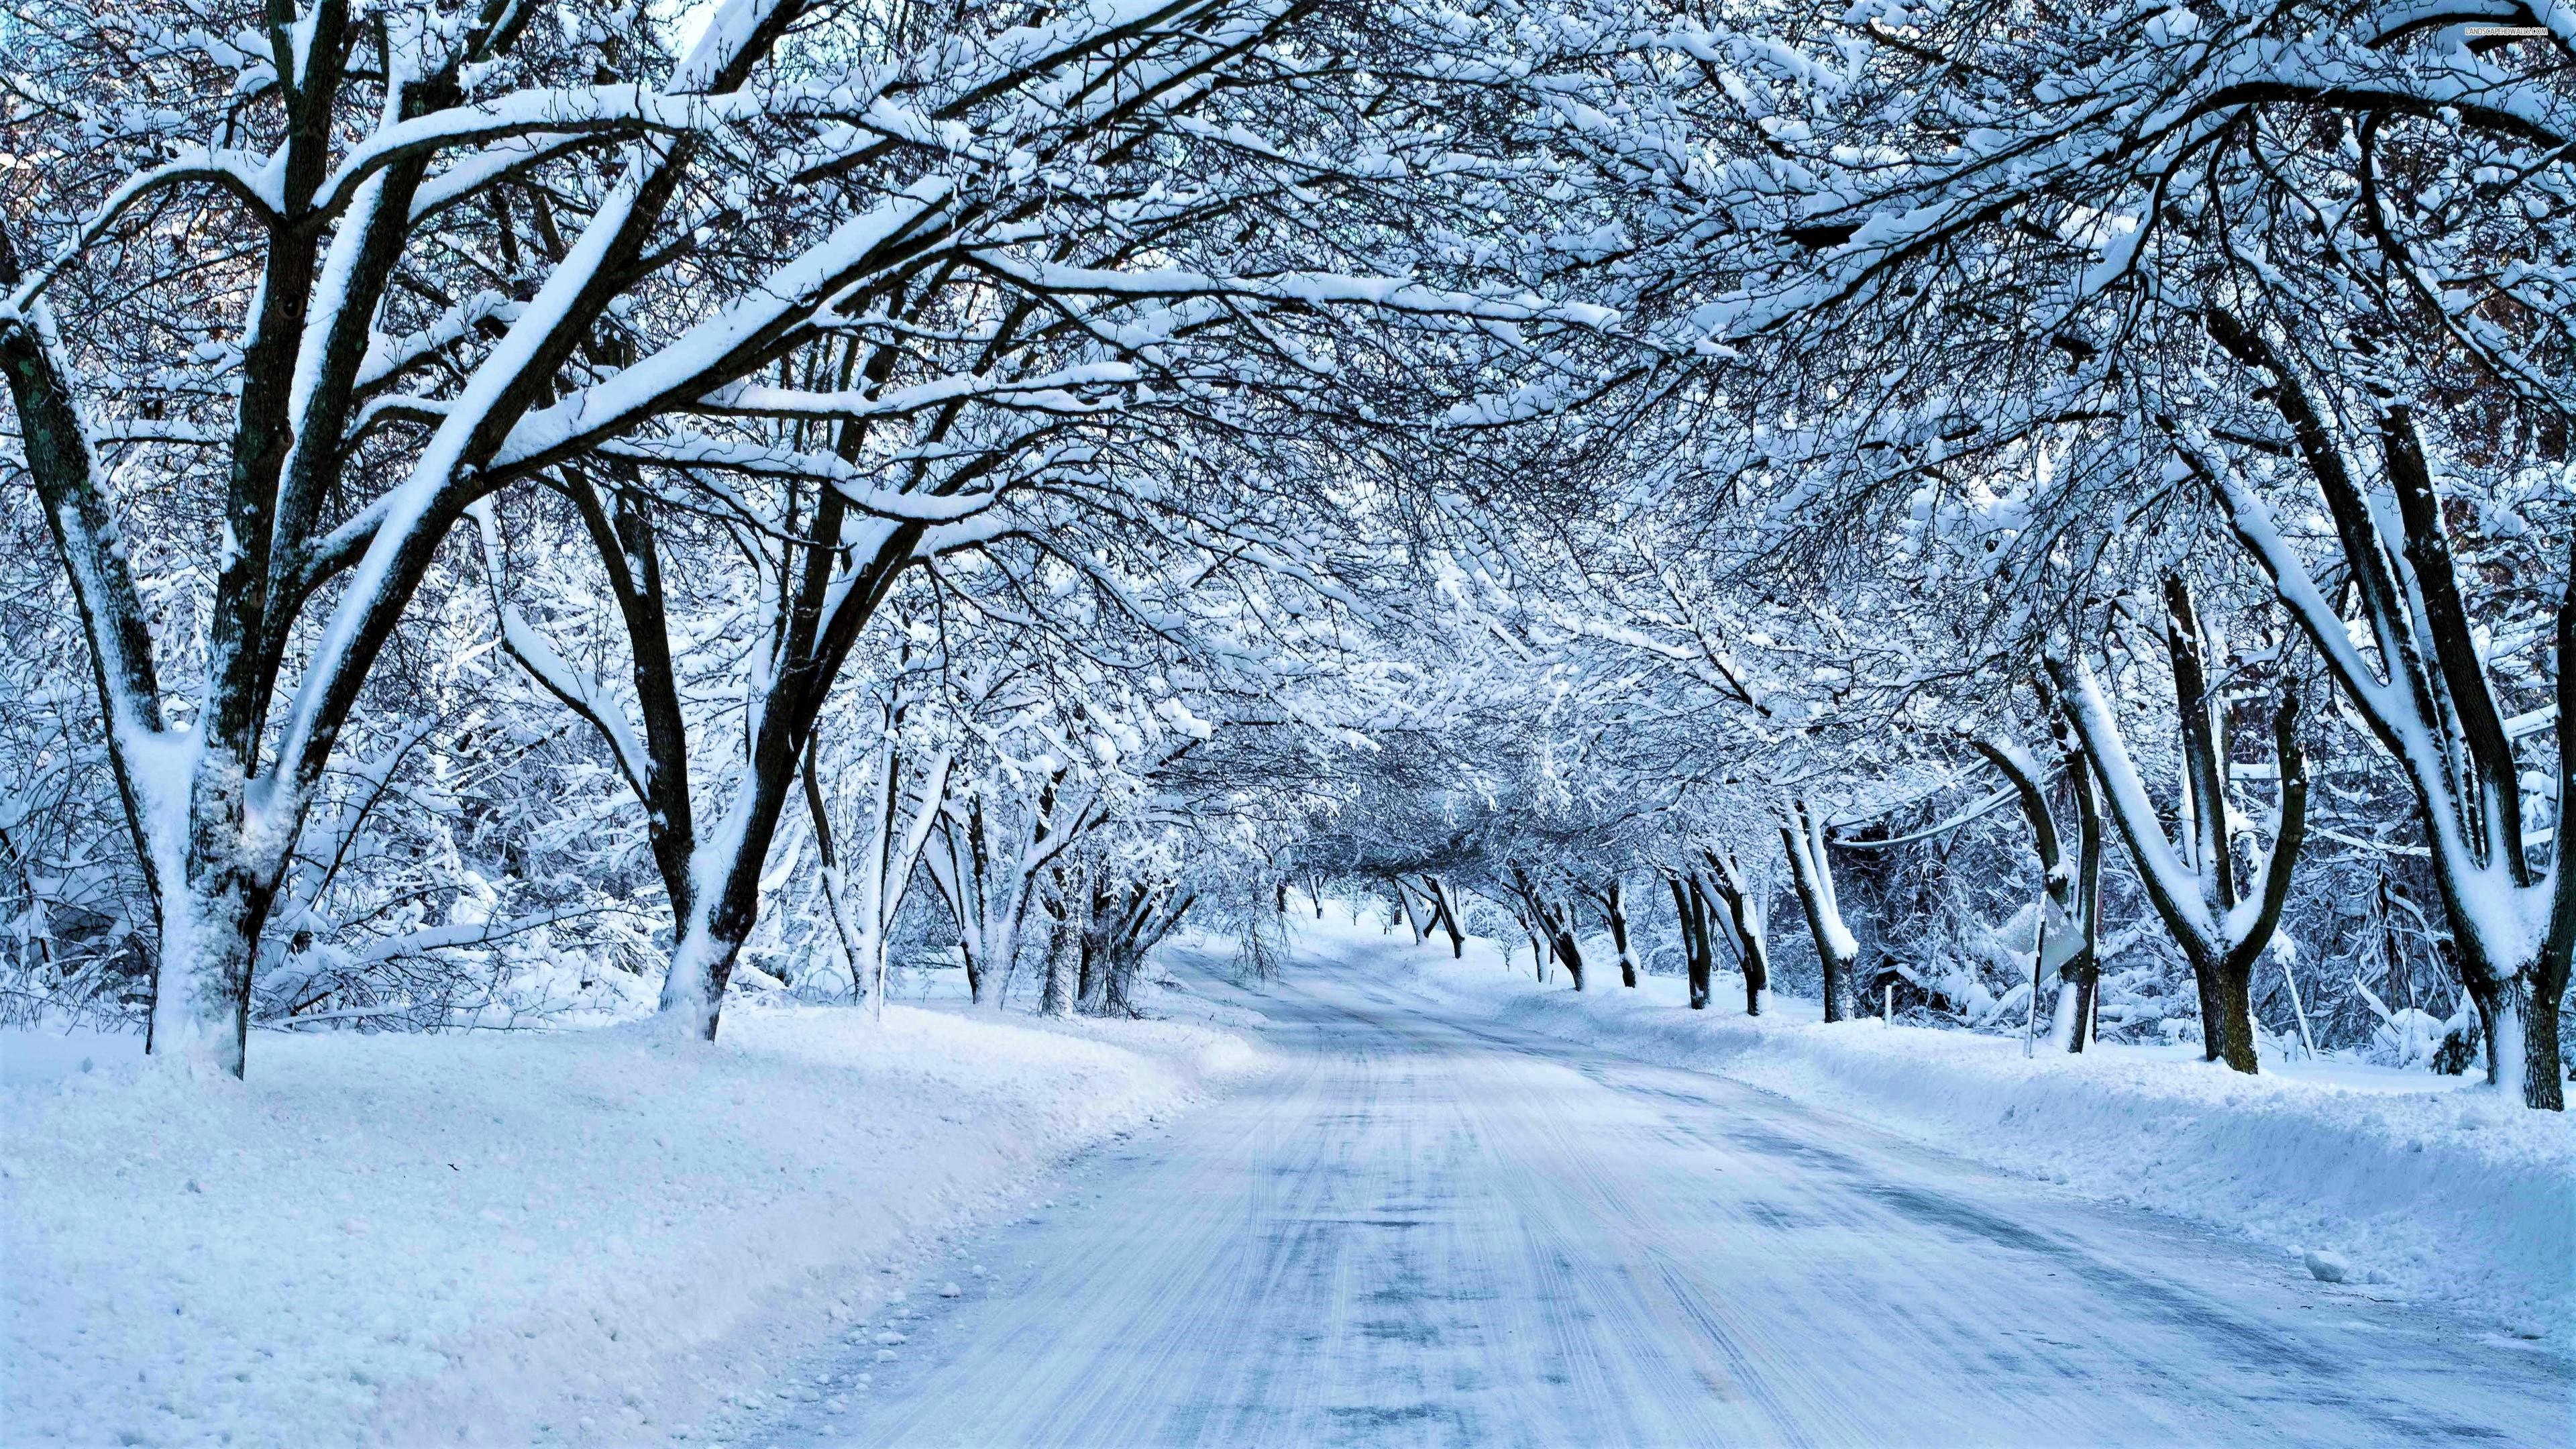 Tree Canopy over Winter Road 4k Ultra HD Wallpapers